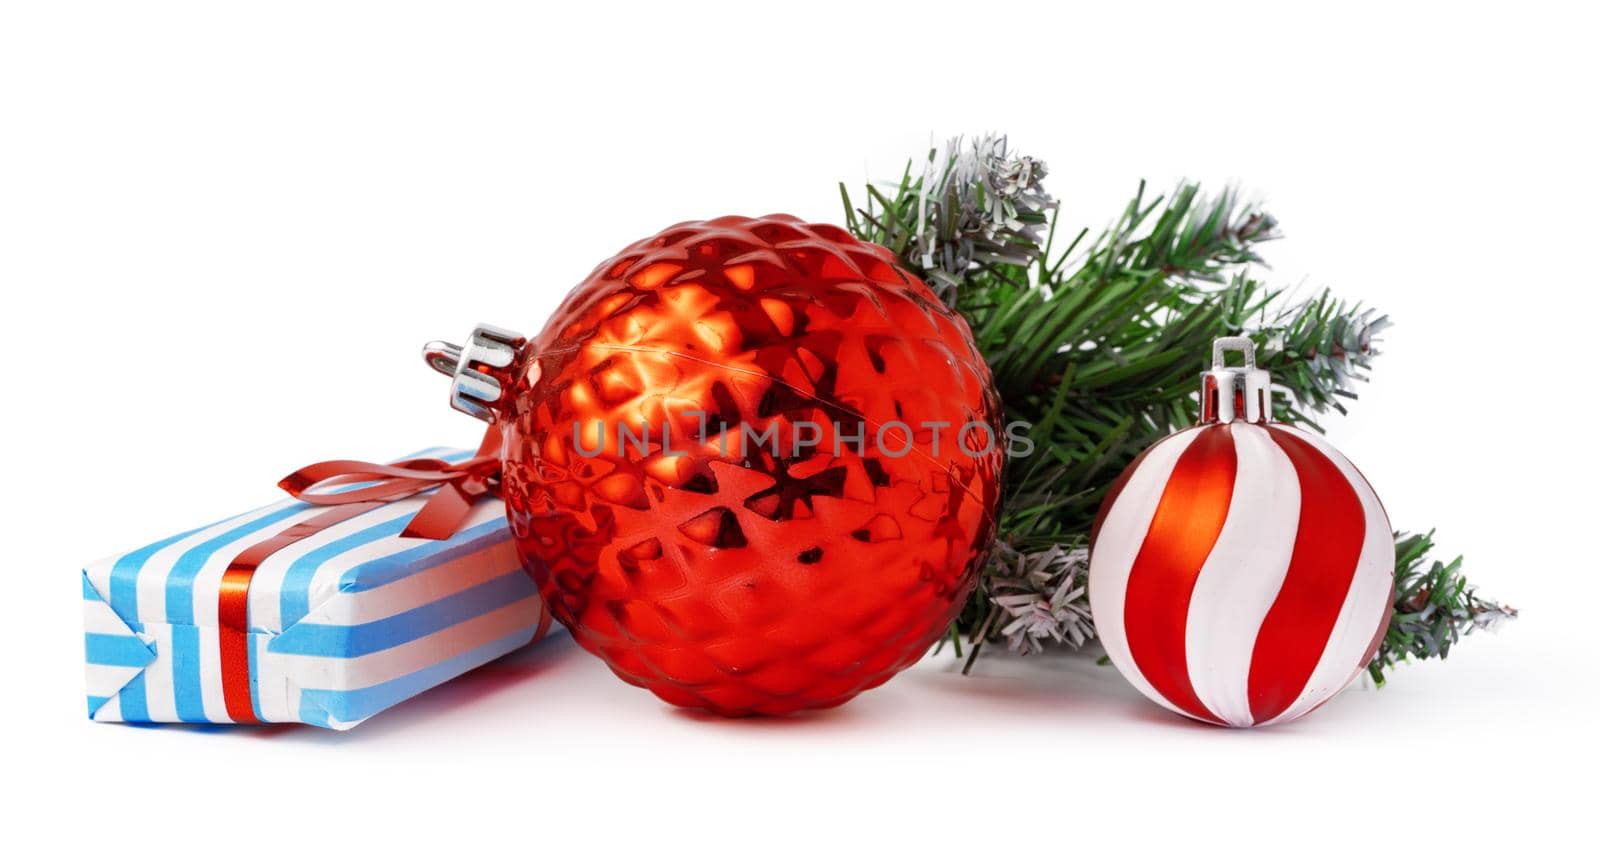 Christmas baubles and festive gift box isolated on white background, close up